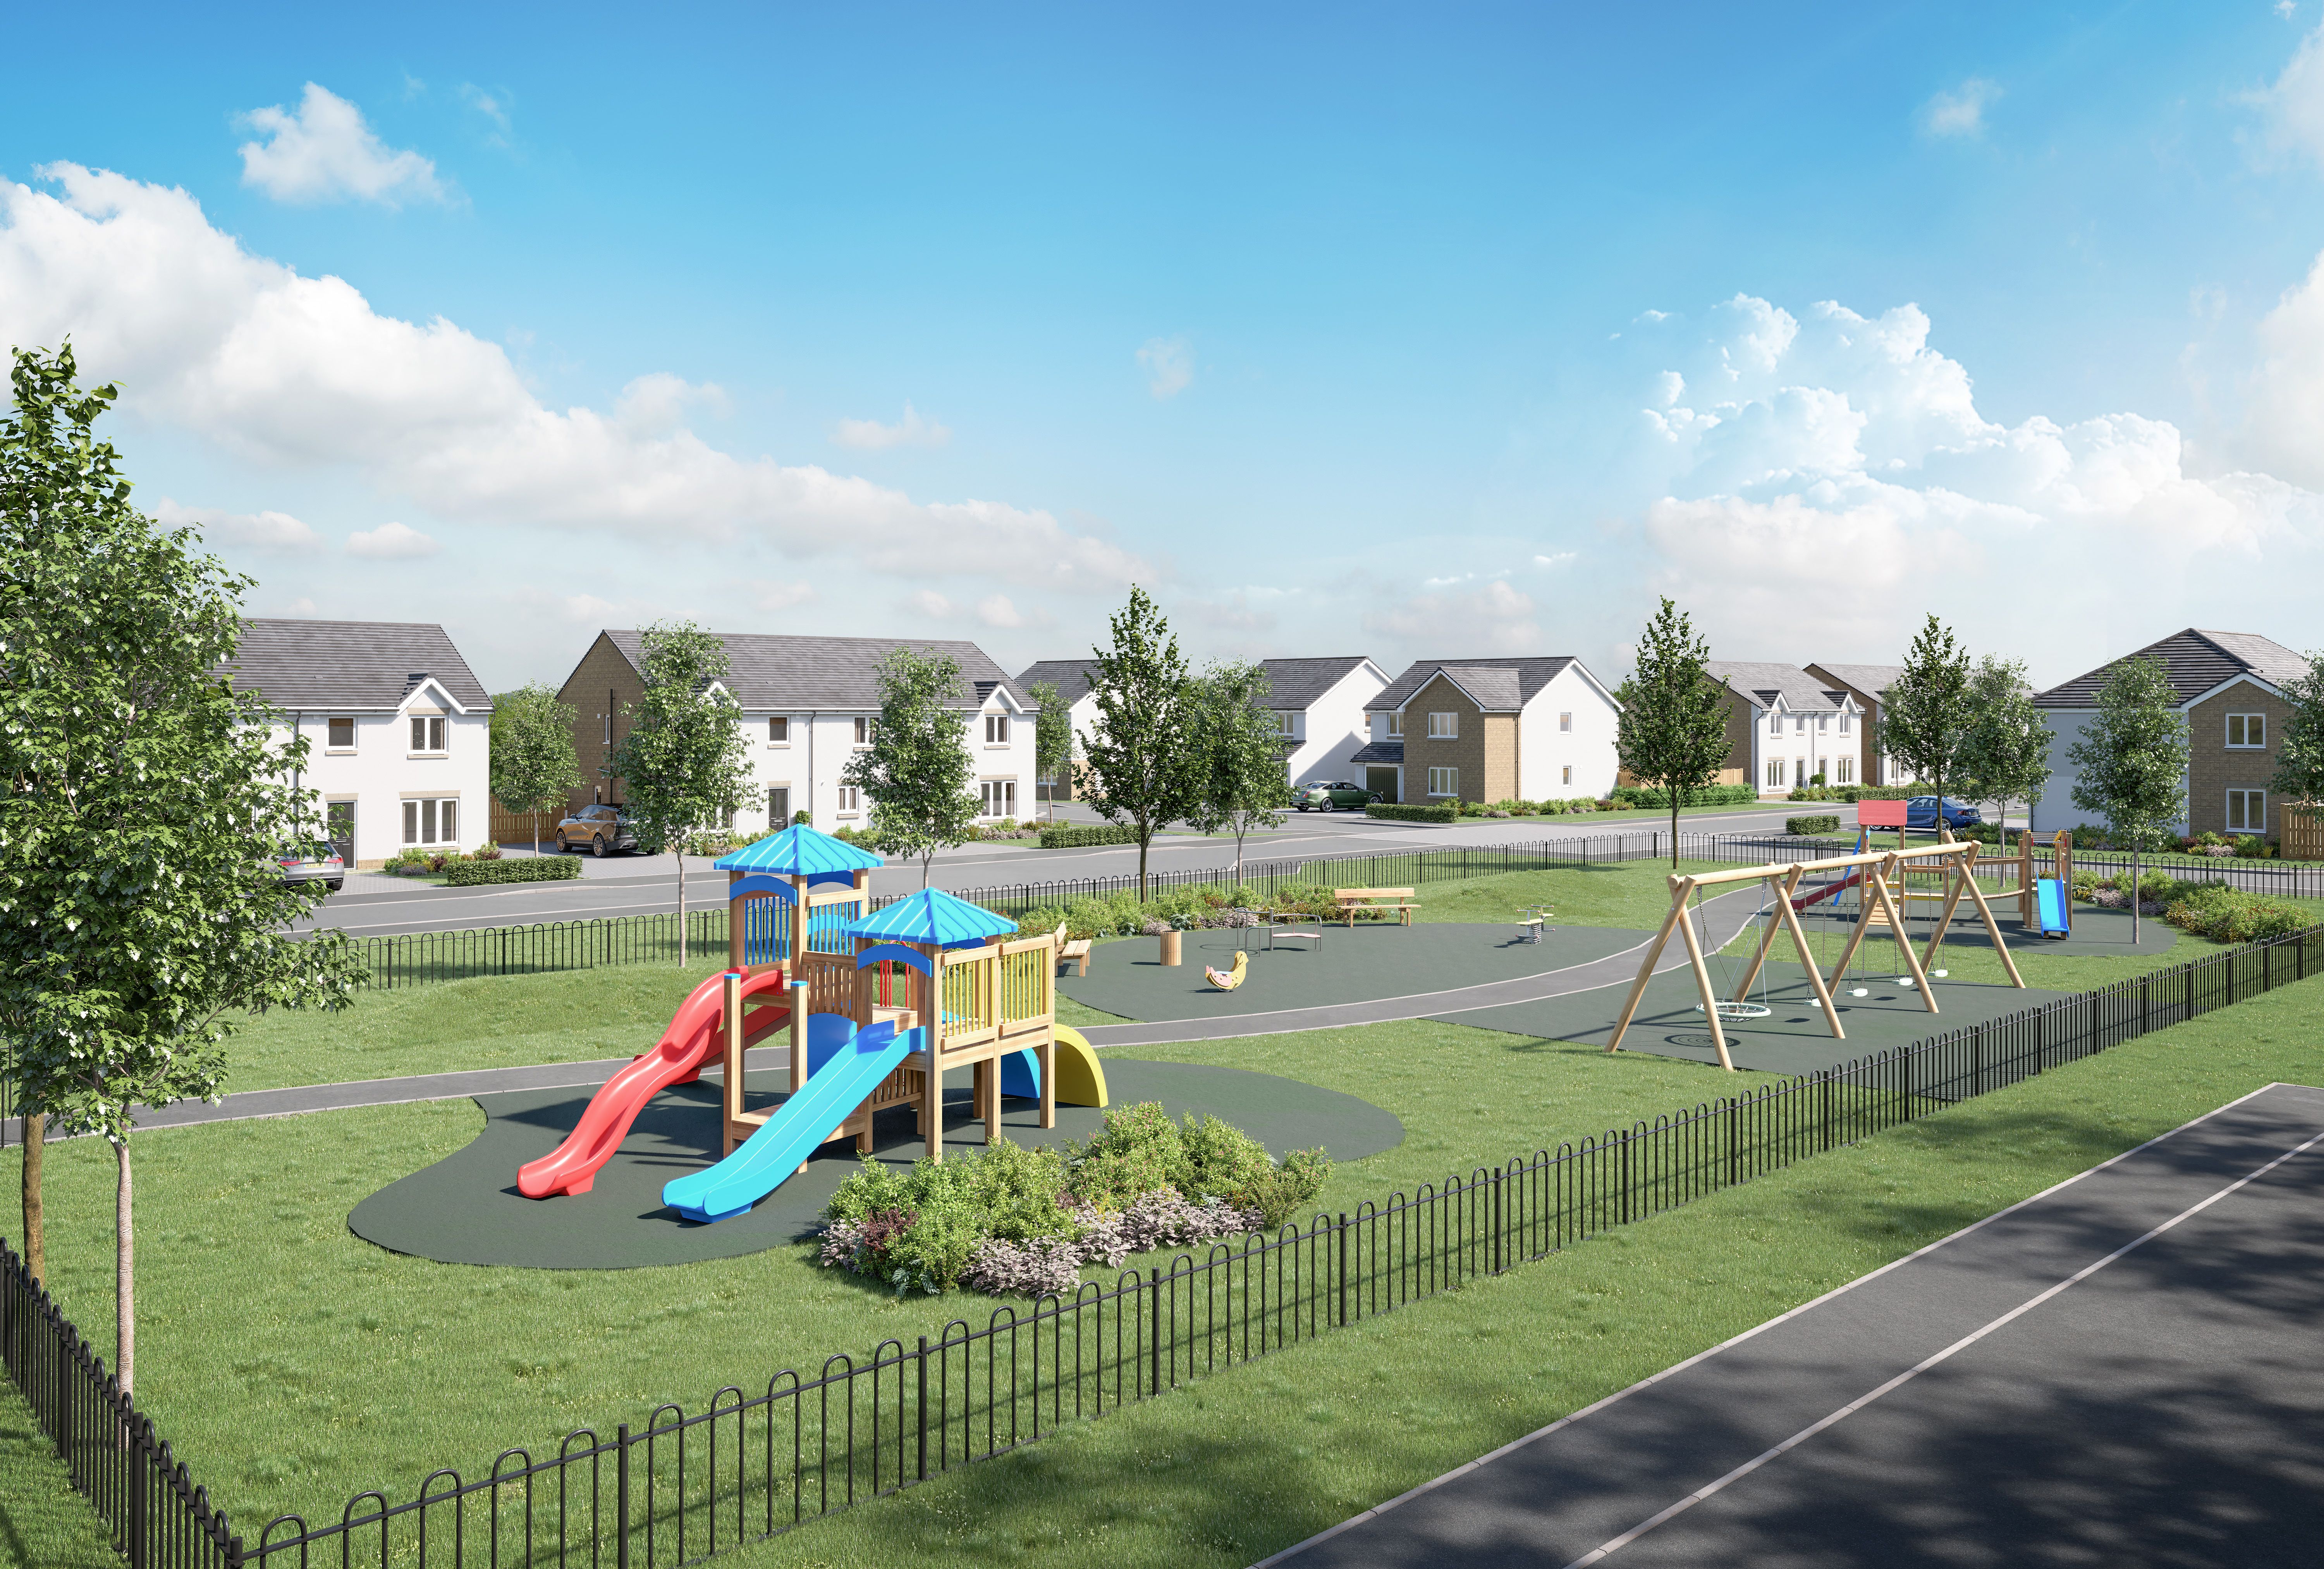 Land acquired by Taylor Wimpey to deliver 535 new homes in Glenboig